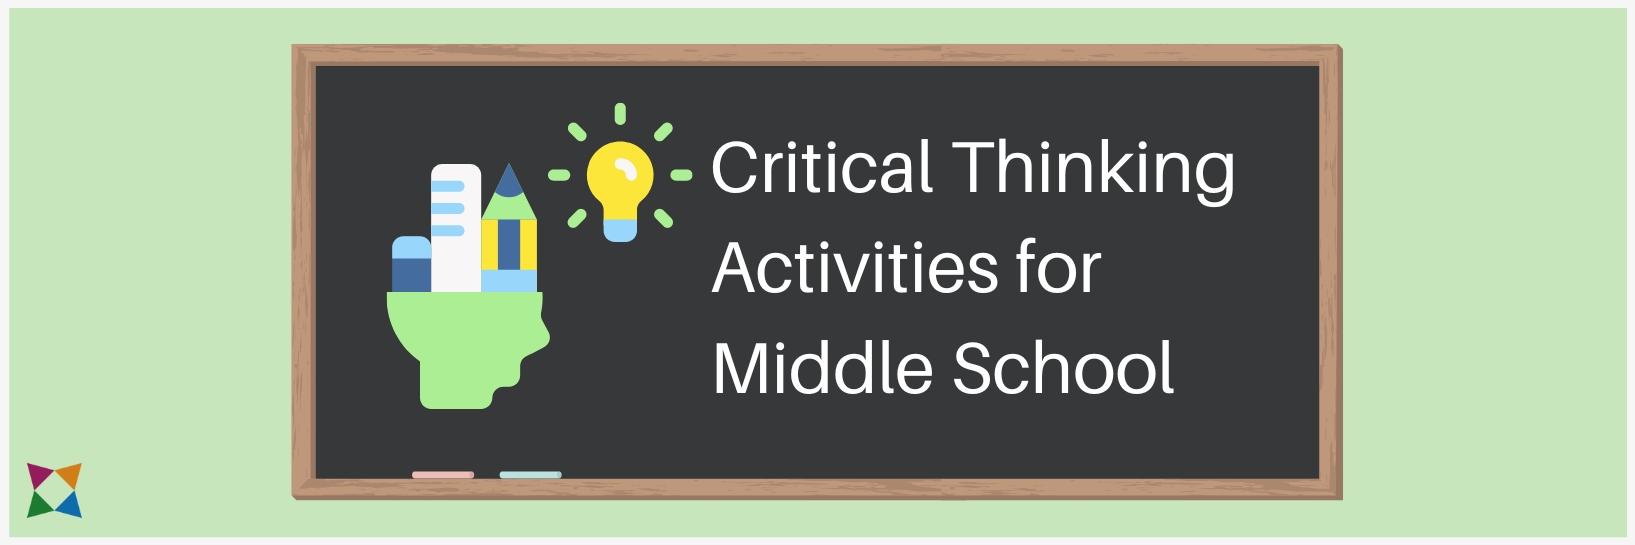 4 Best Critical Thinking Activities for Middle School